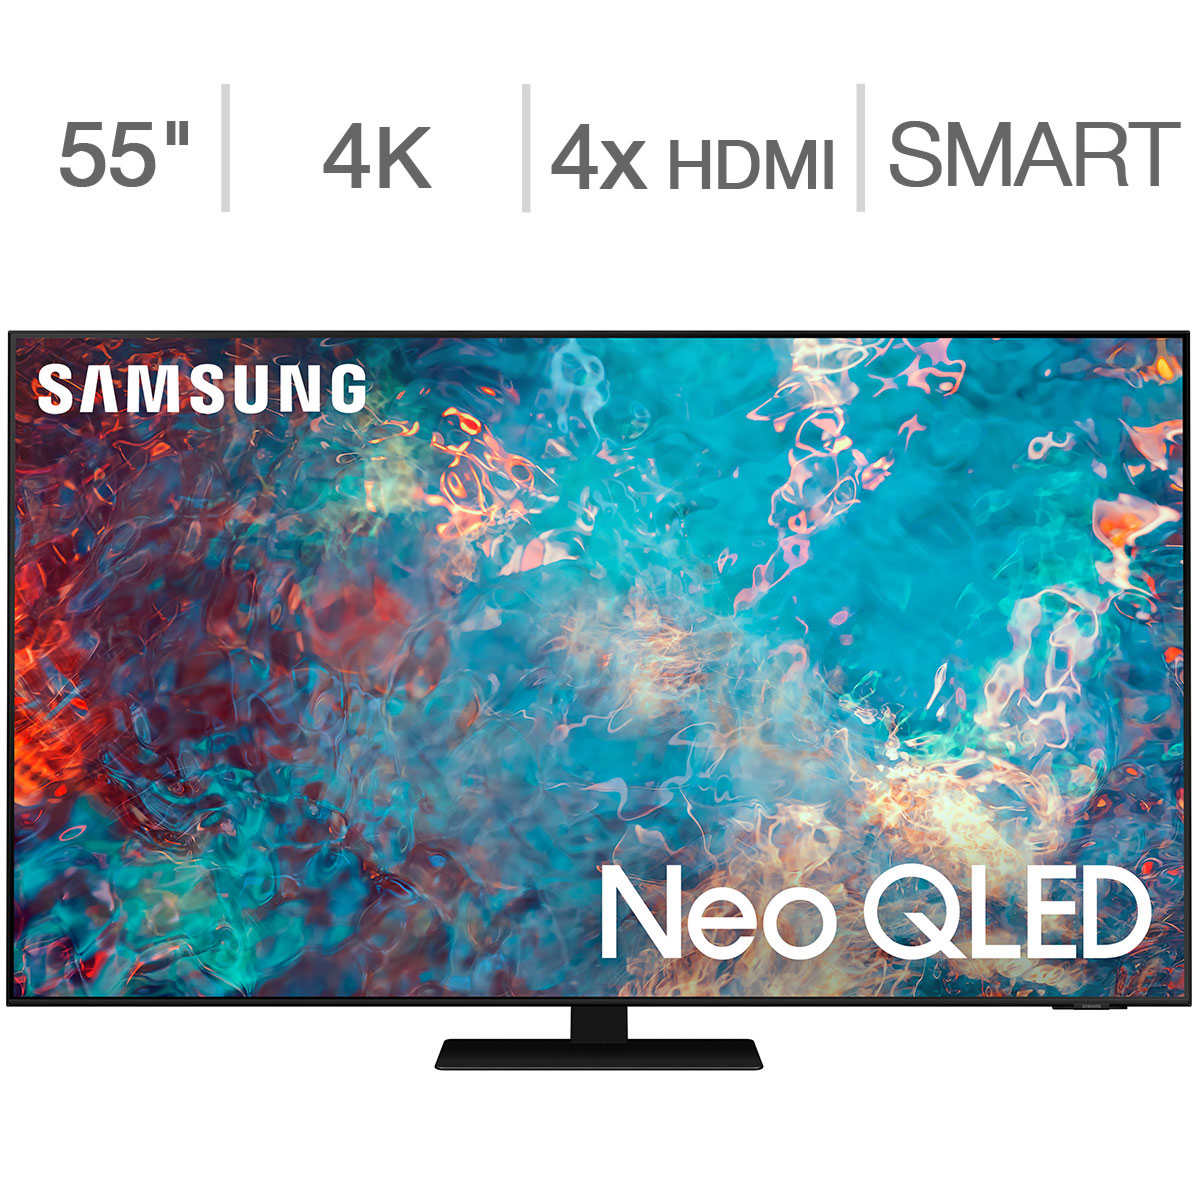 Zuiver helling Spijsverteringsorgaan Samsung 55" Class - QN85 Series - 4K UHD Neo QLED LCD TV - Allstate 3-Year  Protection Plan Bundle Included for 5 years of total coverage* | Costco